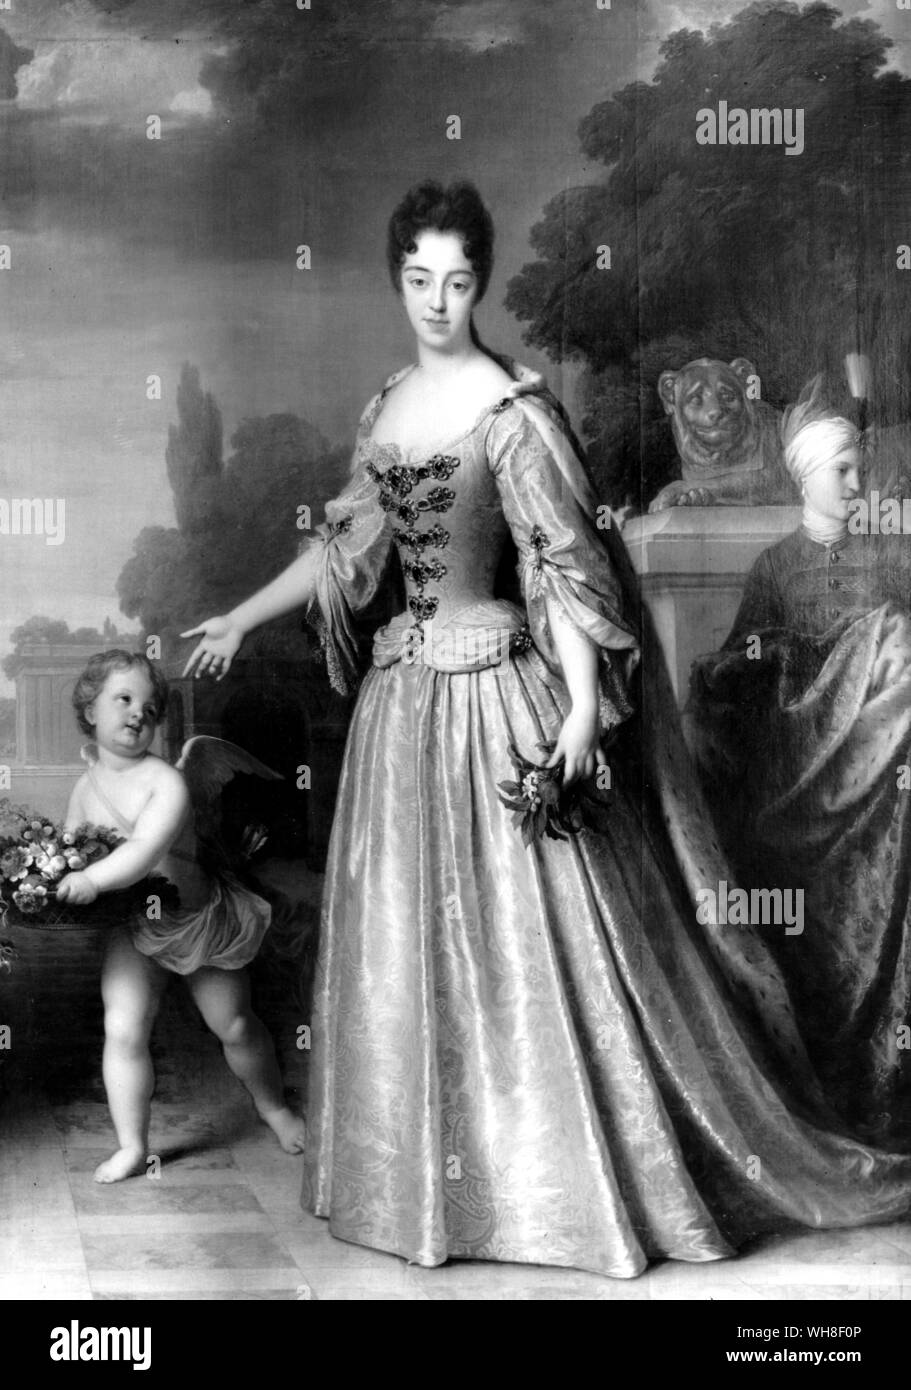 The Duchesse de Bourgogne (Duchess of Bourgogne) by Jean Baptiste Santerre 1709, French Baroque Era painter (1651-1717). From The Sun King by Nancy Mitford, page 210.. . Stock Photo